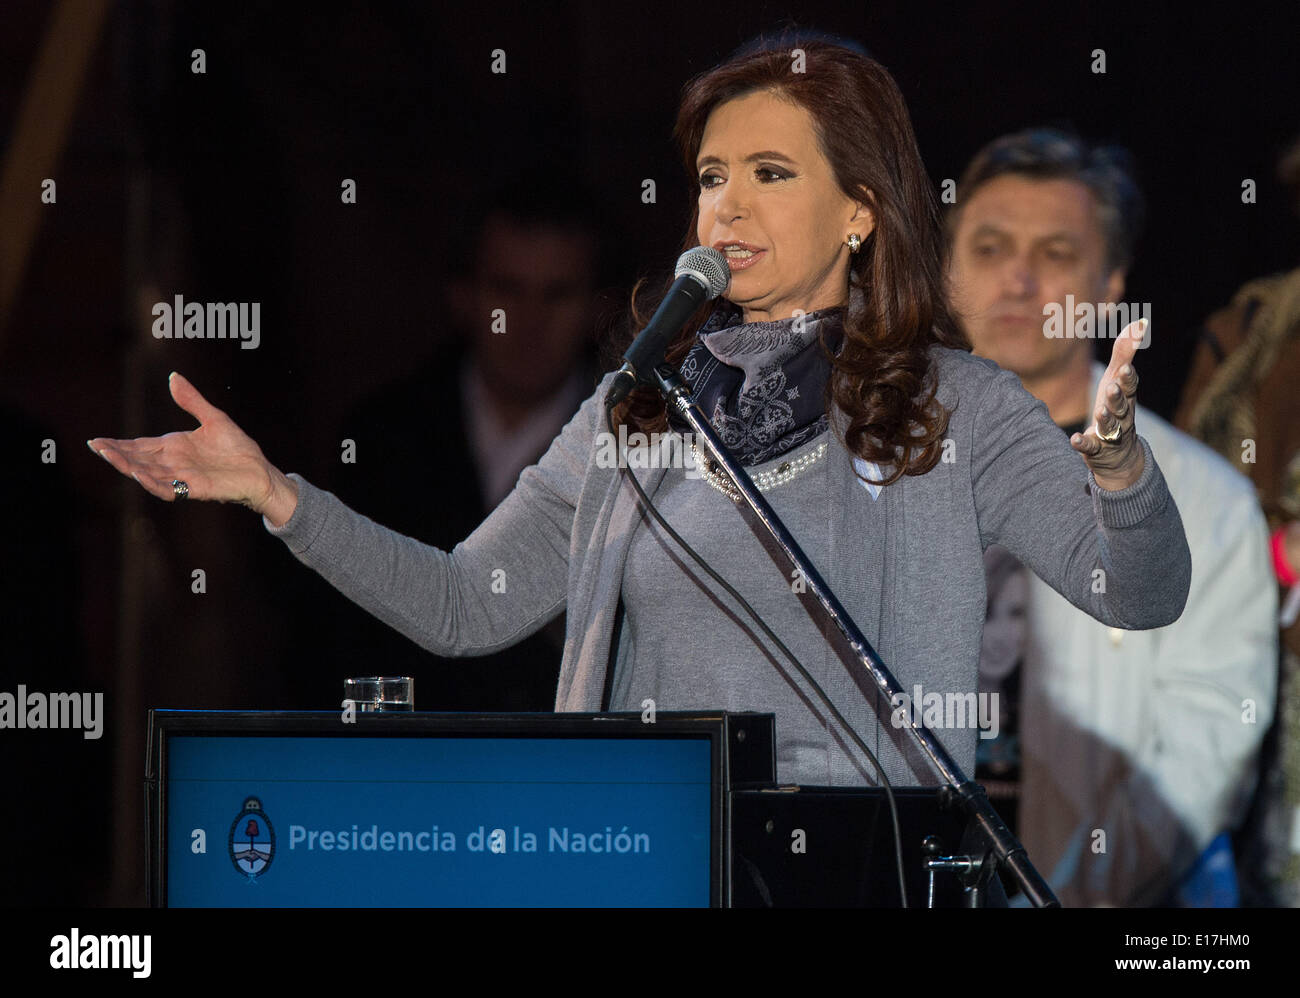 Buenos Aires, Argentina. 25th May, 2014. Argentinean President Cristina Fernandez (C) delivers a speech during an activity for the commemoration of the 204th anniversary of 'Revolucion de Mayo' at the Mayo Square, in the city of Buenos Aires, capital of Argentina, on May 25, 2014. Credit:  Martin Zabala/Xinhua/Alamy Live News Stock Photo